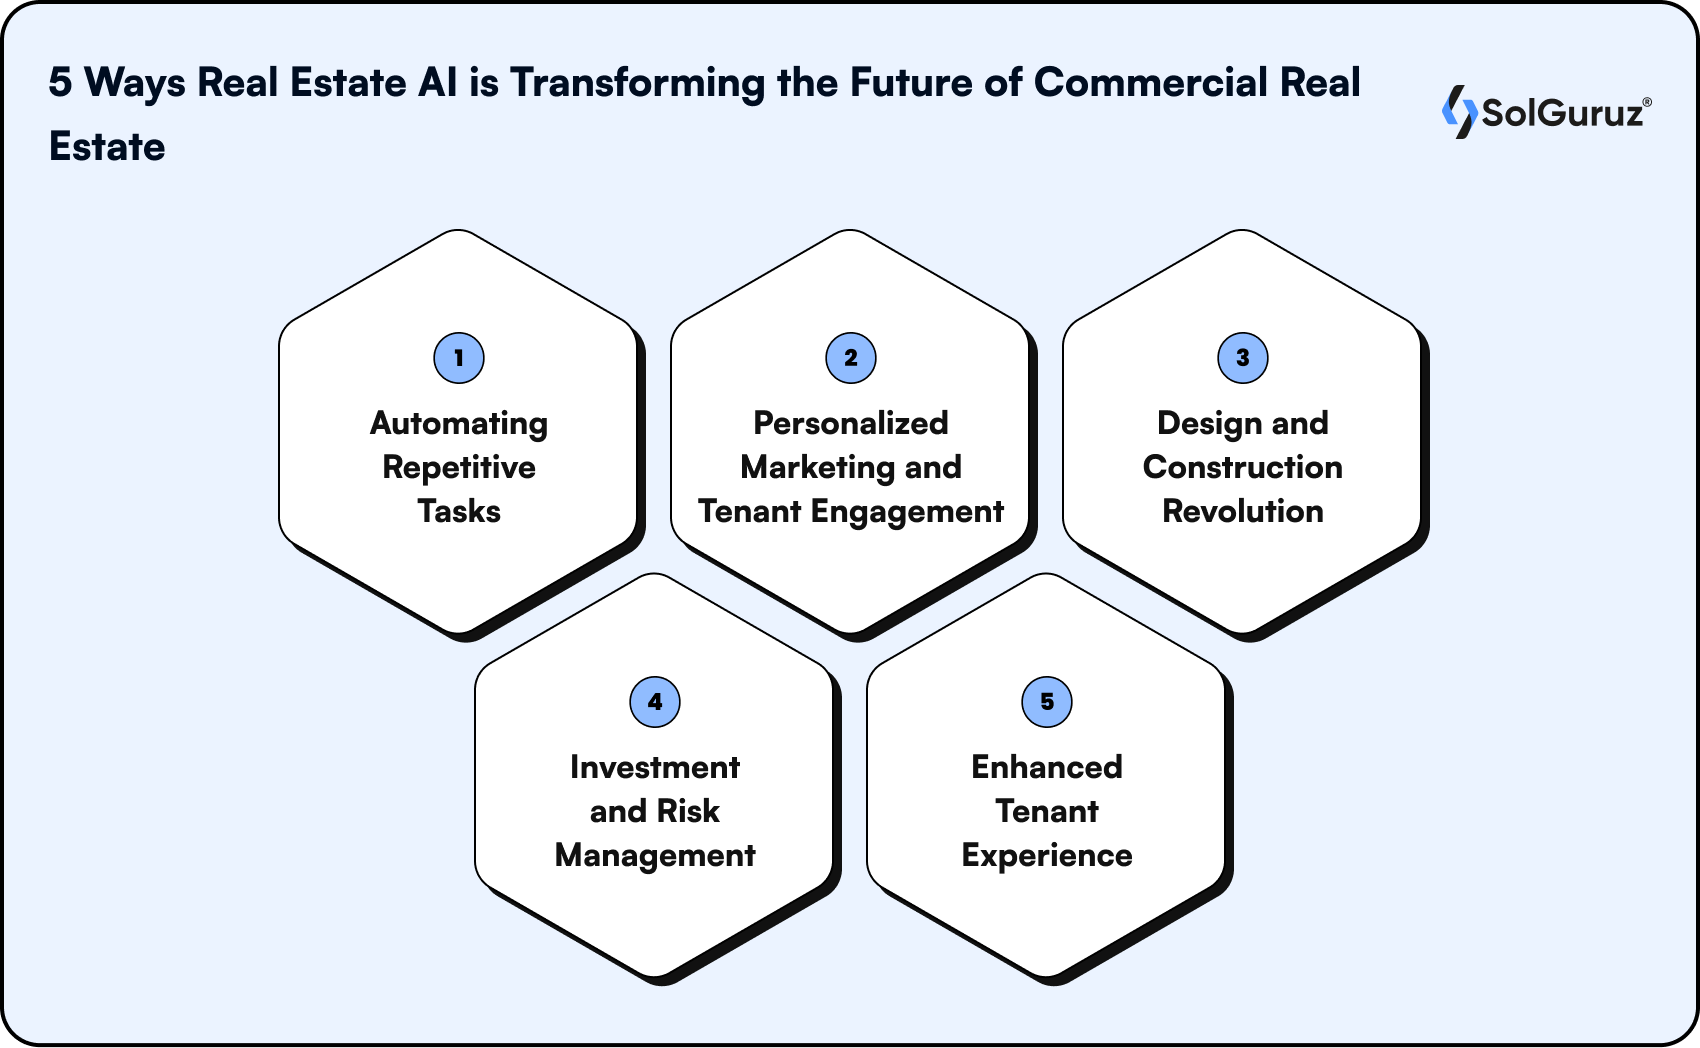 5 Ways Real Estate AI is Transforming the Future of Commercial Real Estate